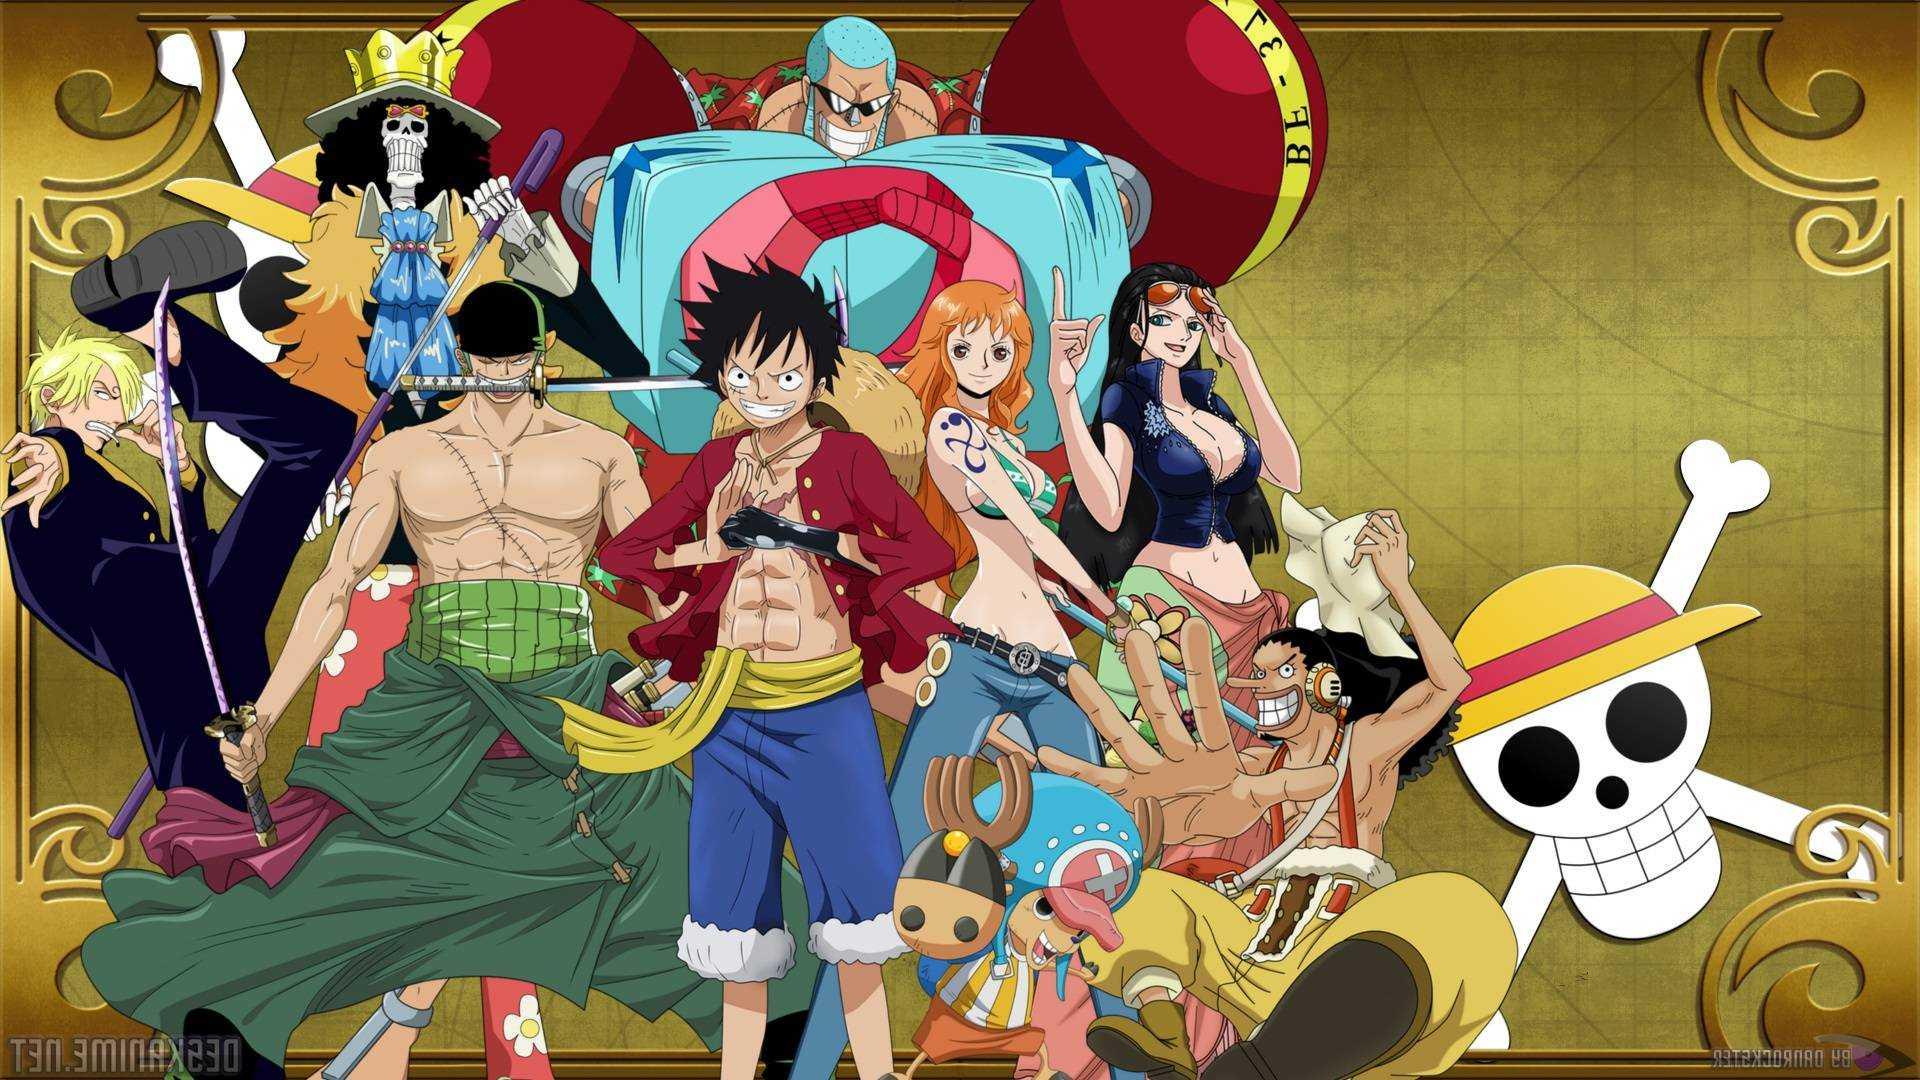 1920 x 1080 · jpeg - One Piece Wallpapers Full HD - Wallpaper Cave